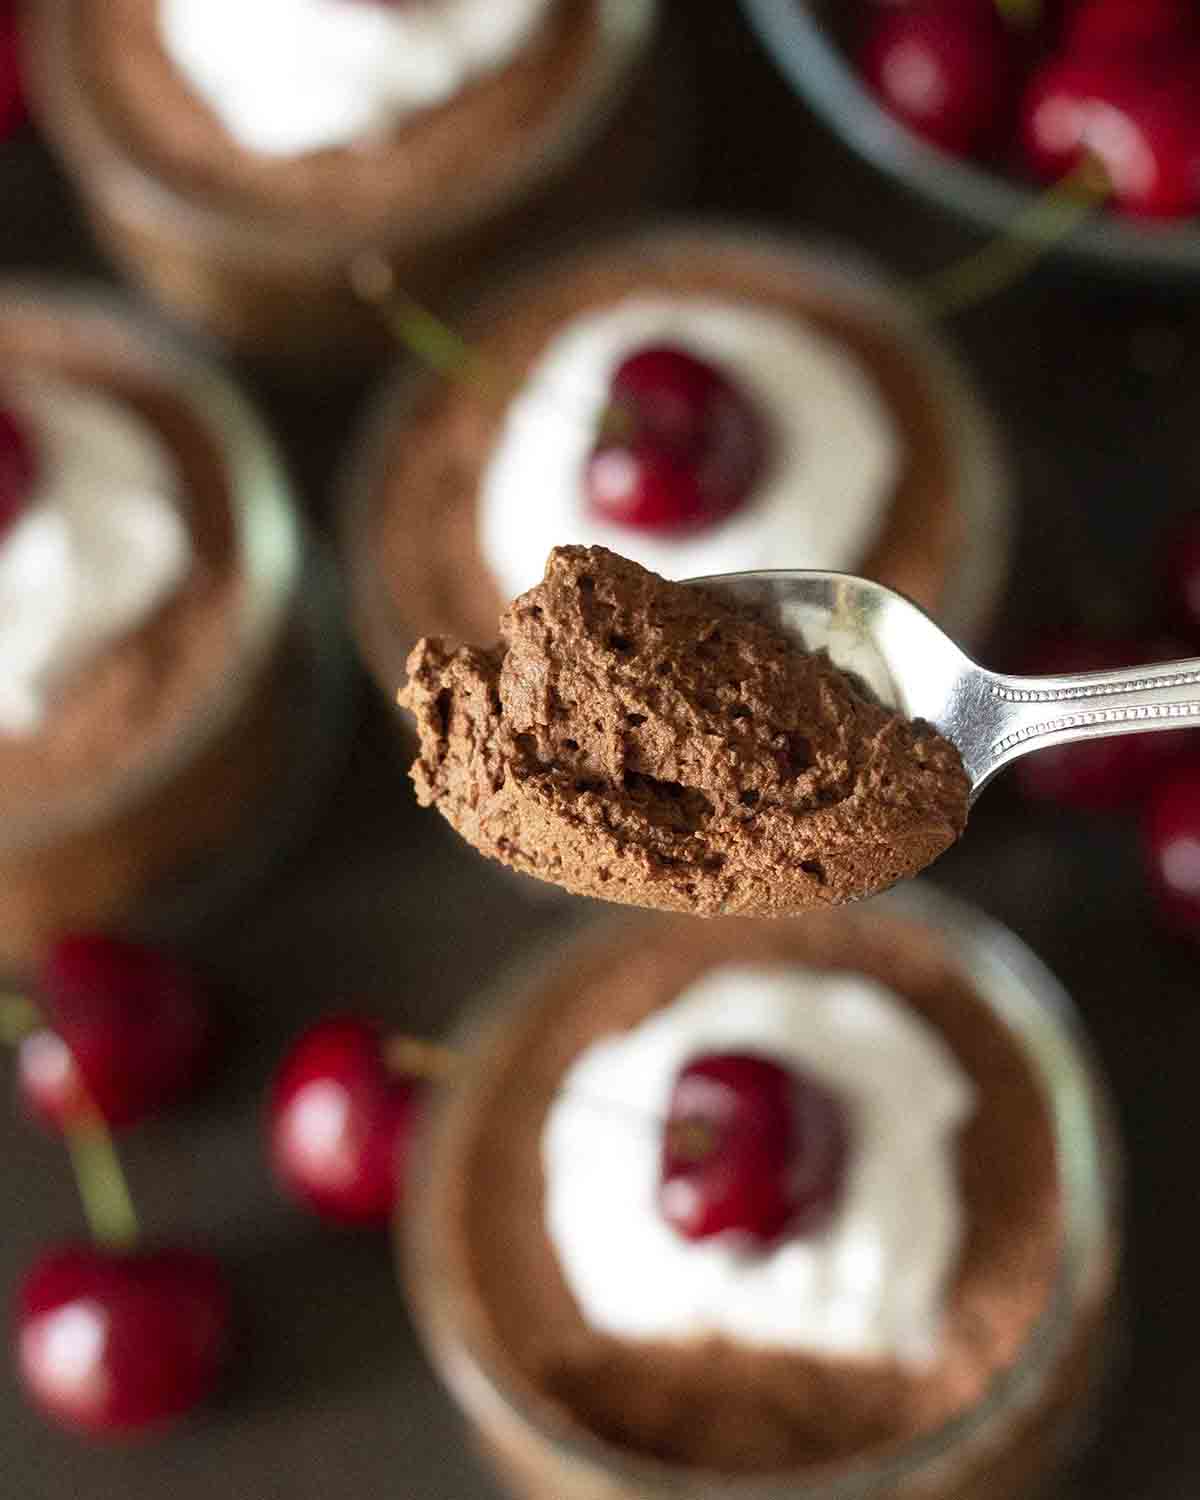 A close up shot of dairy-free chocolate mousse on a spoon to show the fluffy, bubbly texture.